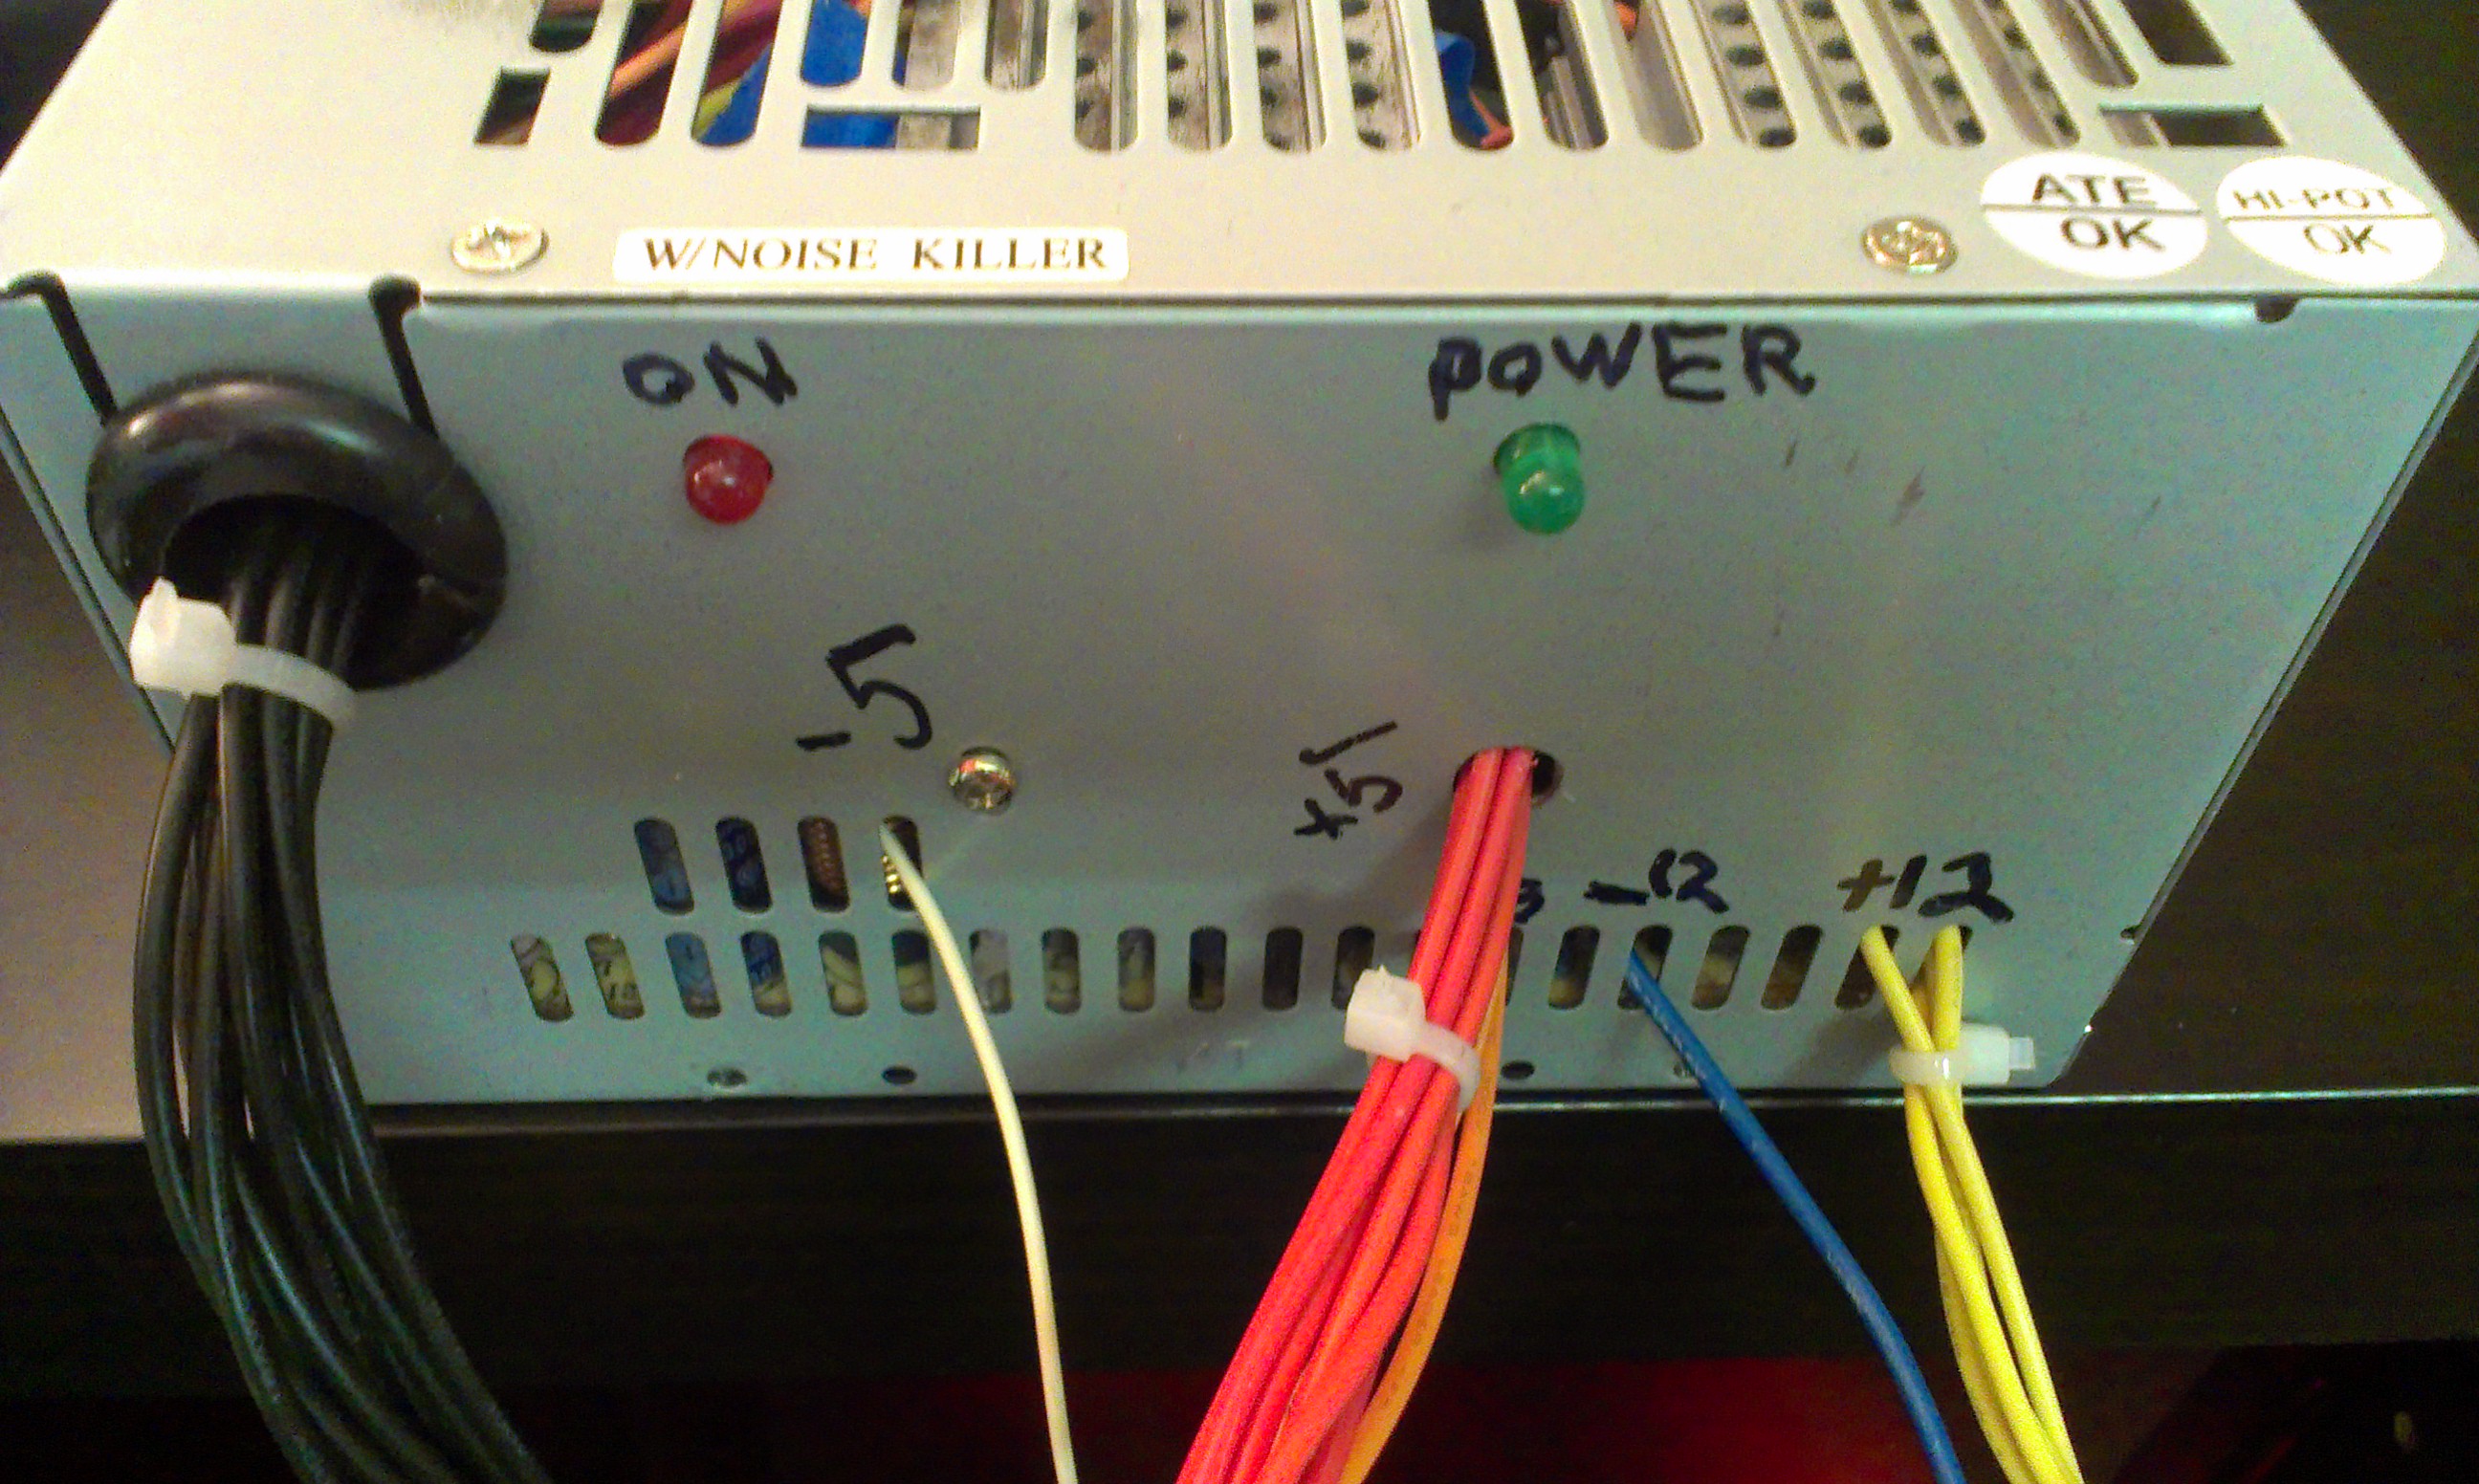 The front of the hacked power supply with labelled leads and power LEDs